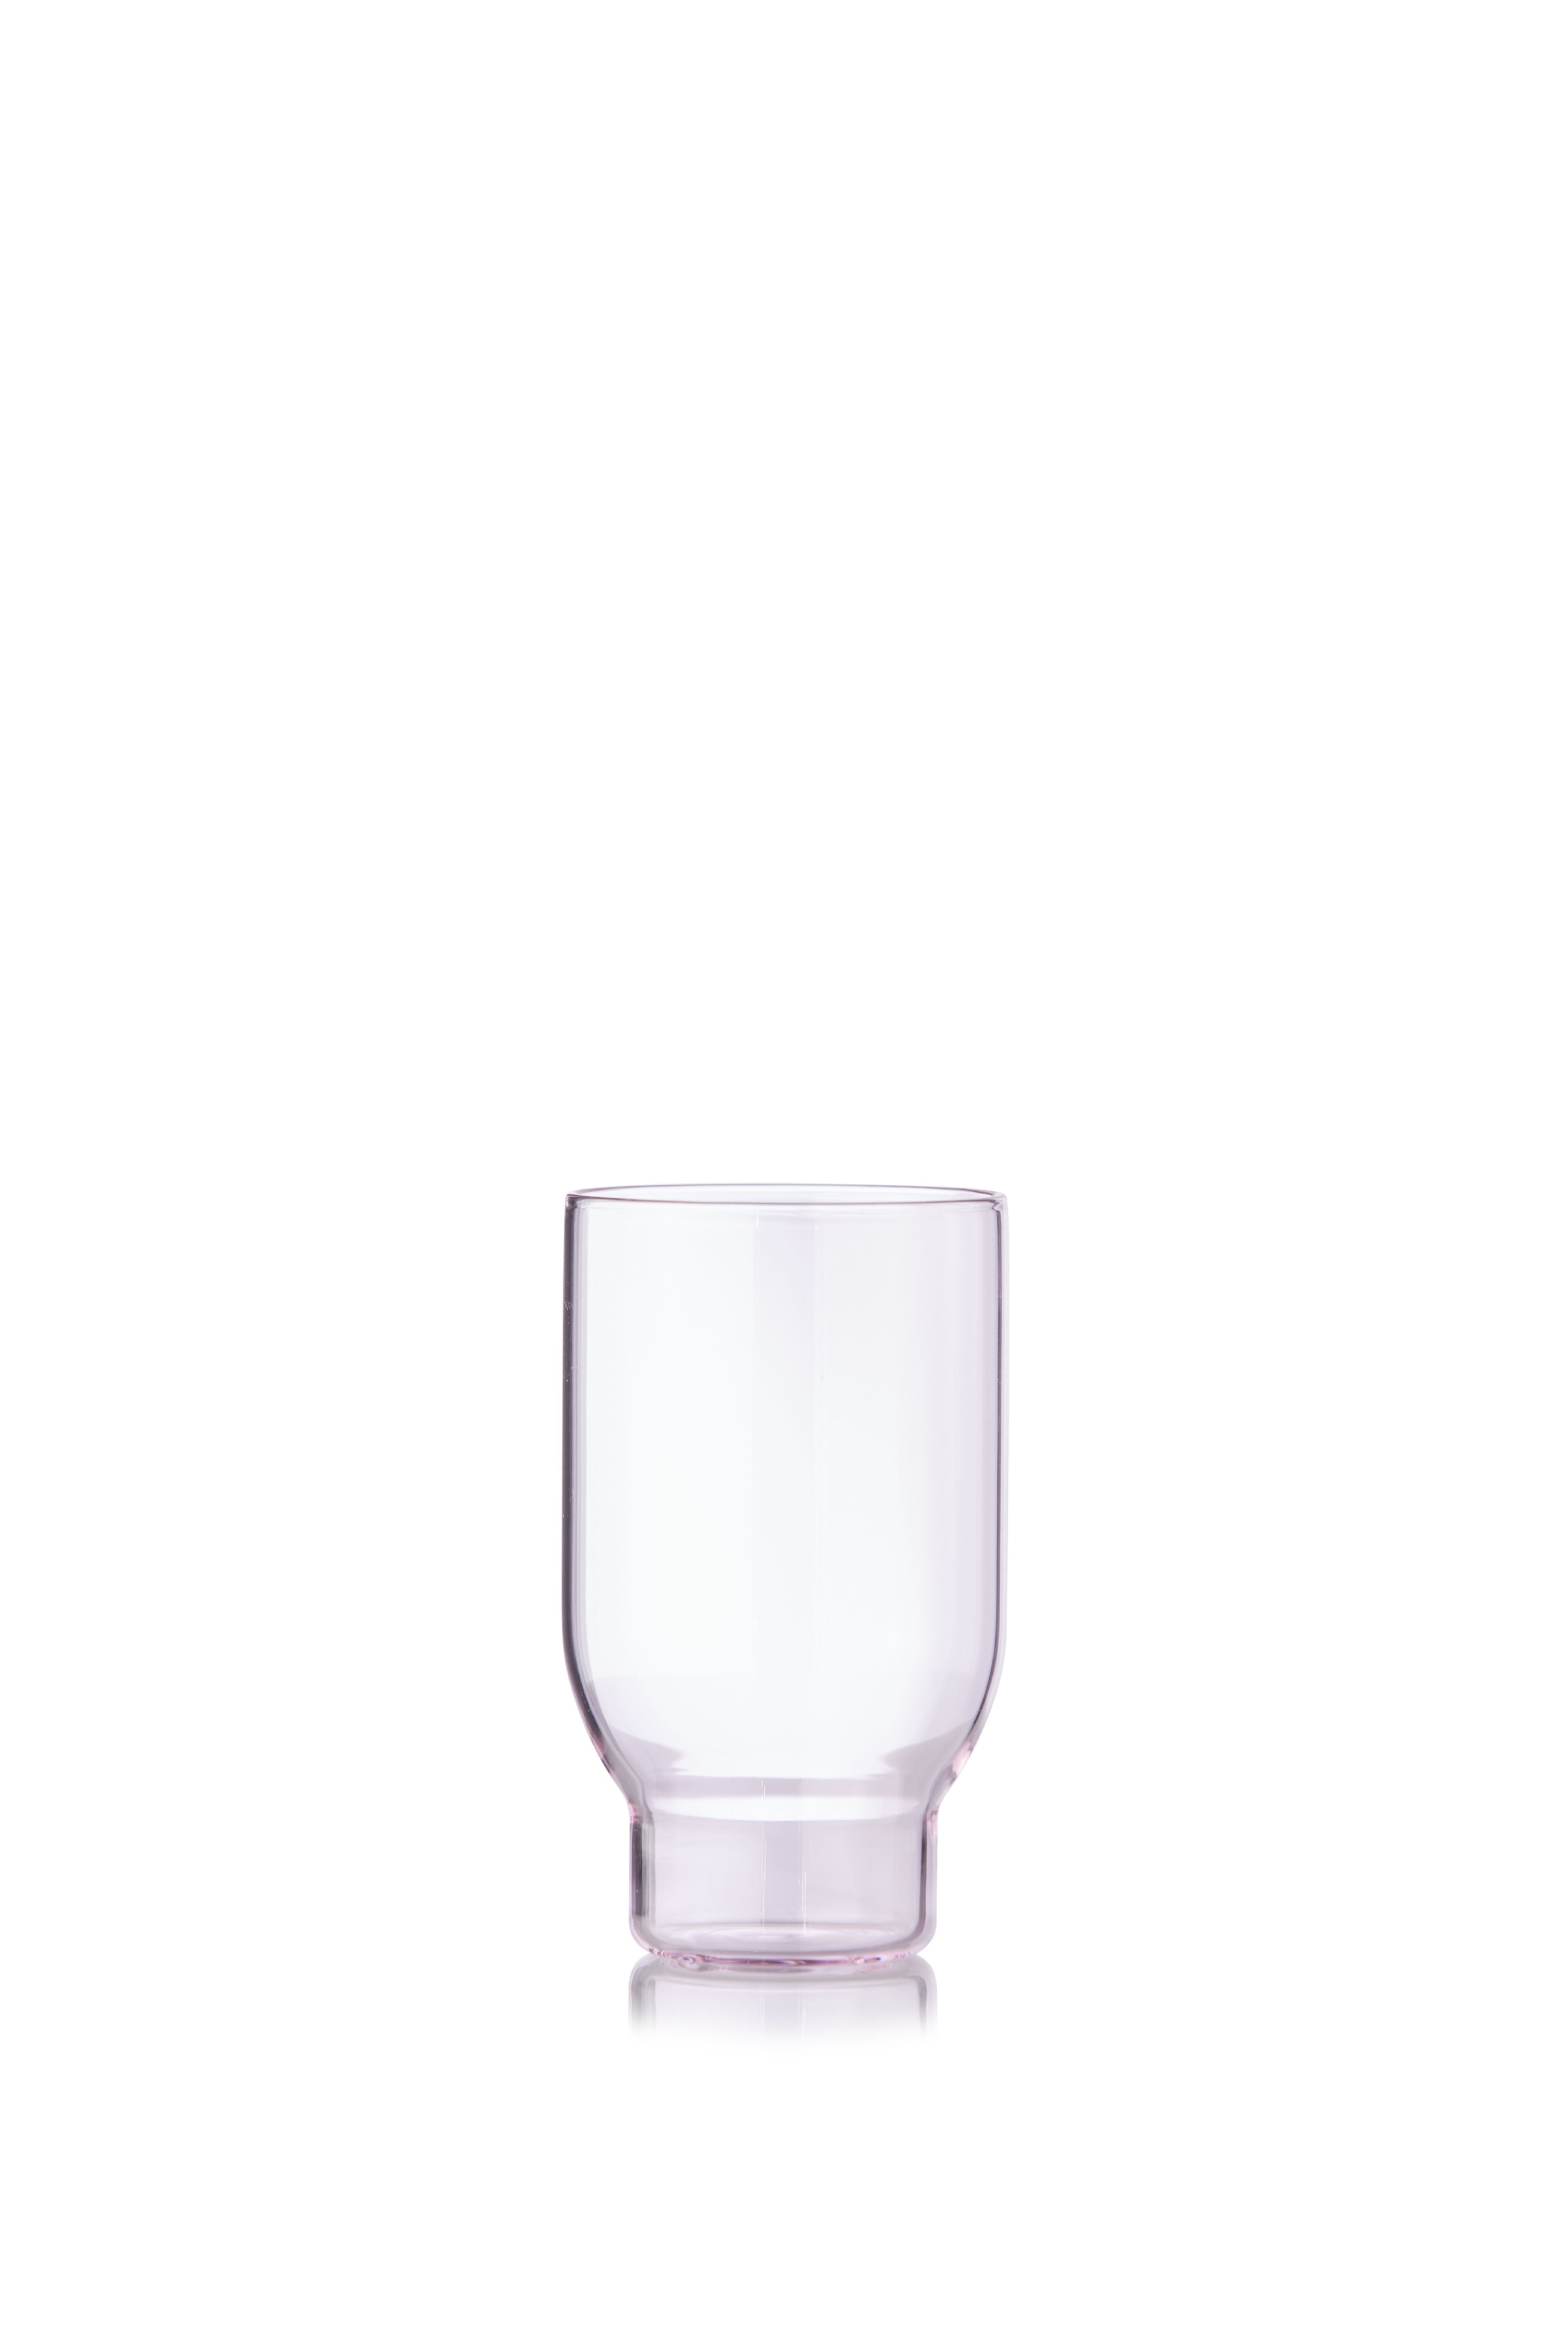 Studio About Glassware Set Of 2 Water Glasses, Rose